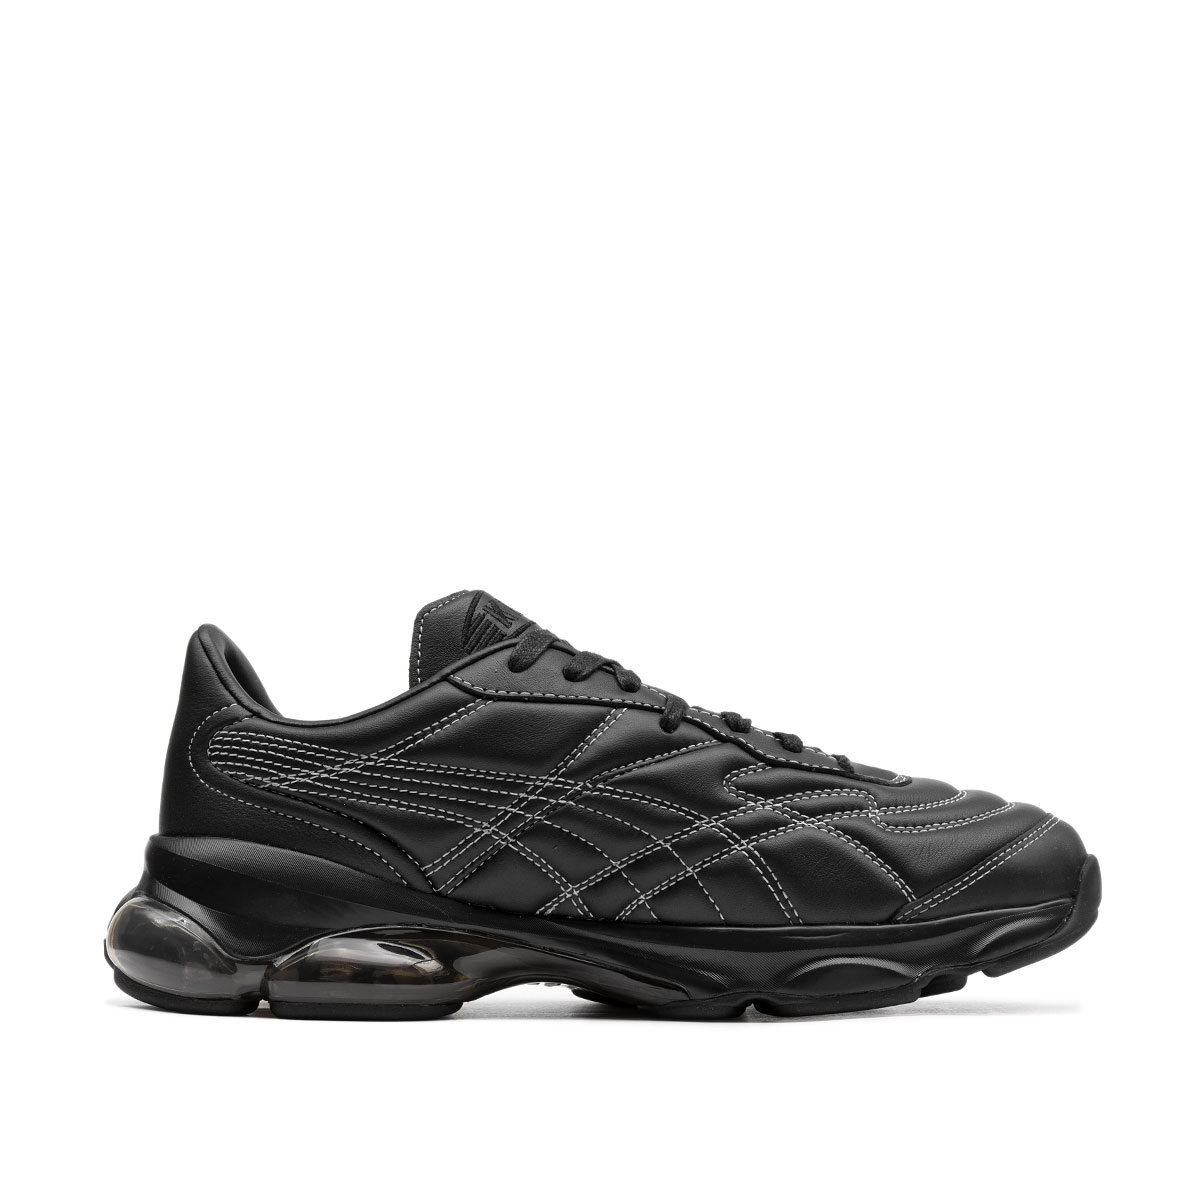 Puma Cell Dome Billy Walsh  371720-01